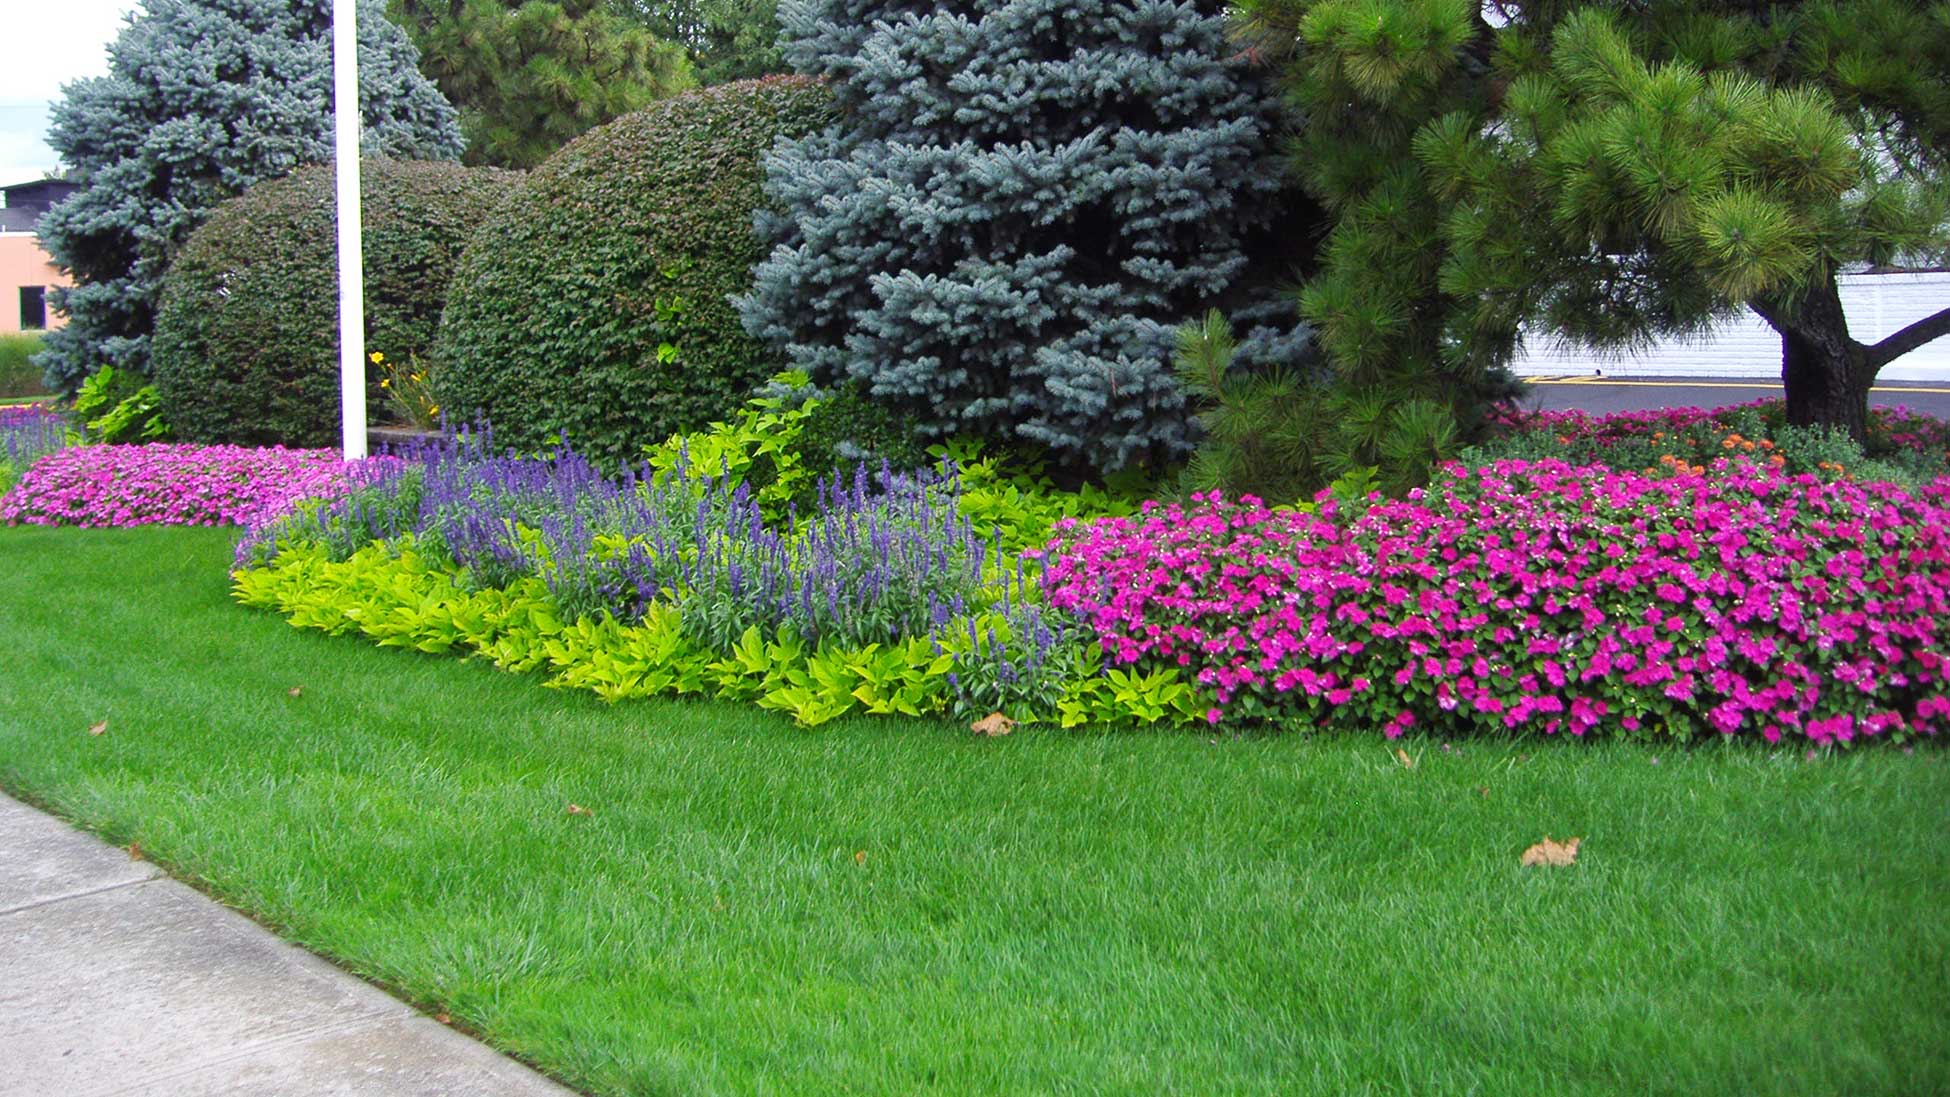 Our expert designers create softscapes that grab attention and increase curb appeal for your property.